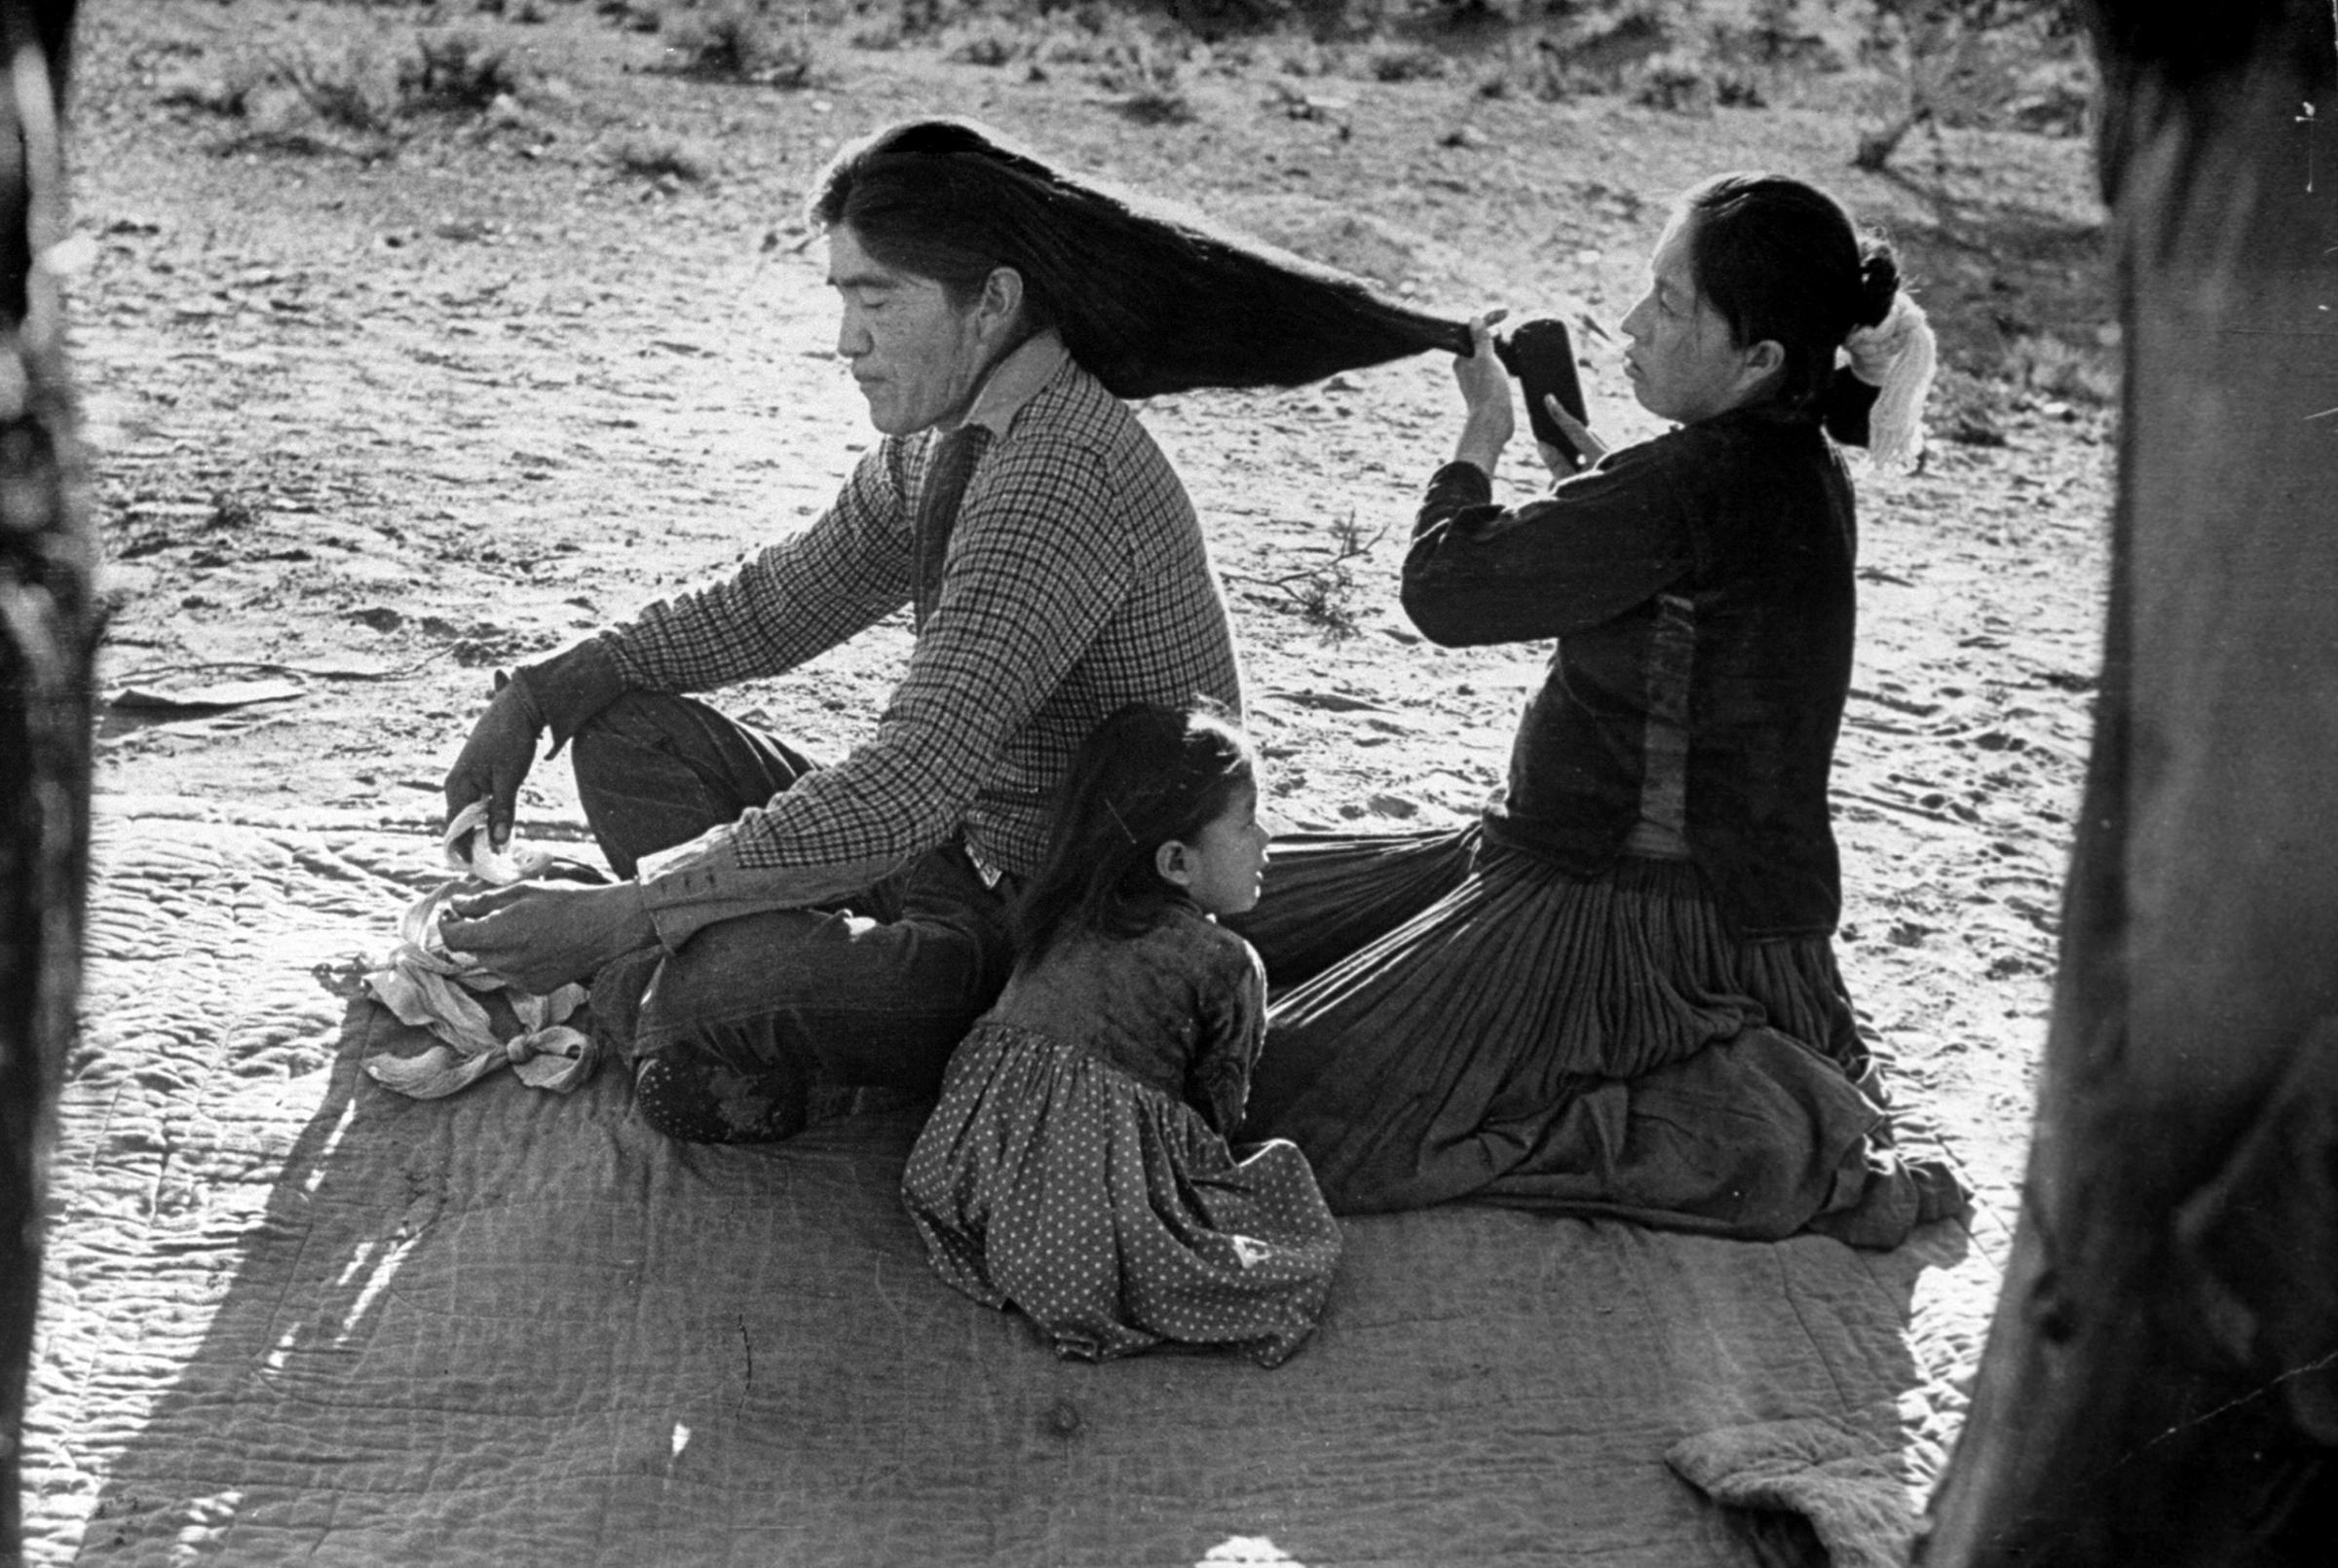 Yellowsalt's son has his hair brushed by wife. Nowadays many young Navajos wear their hair short.